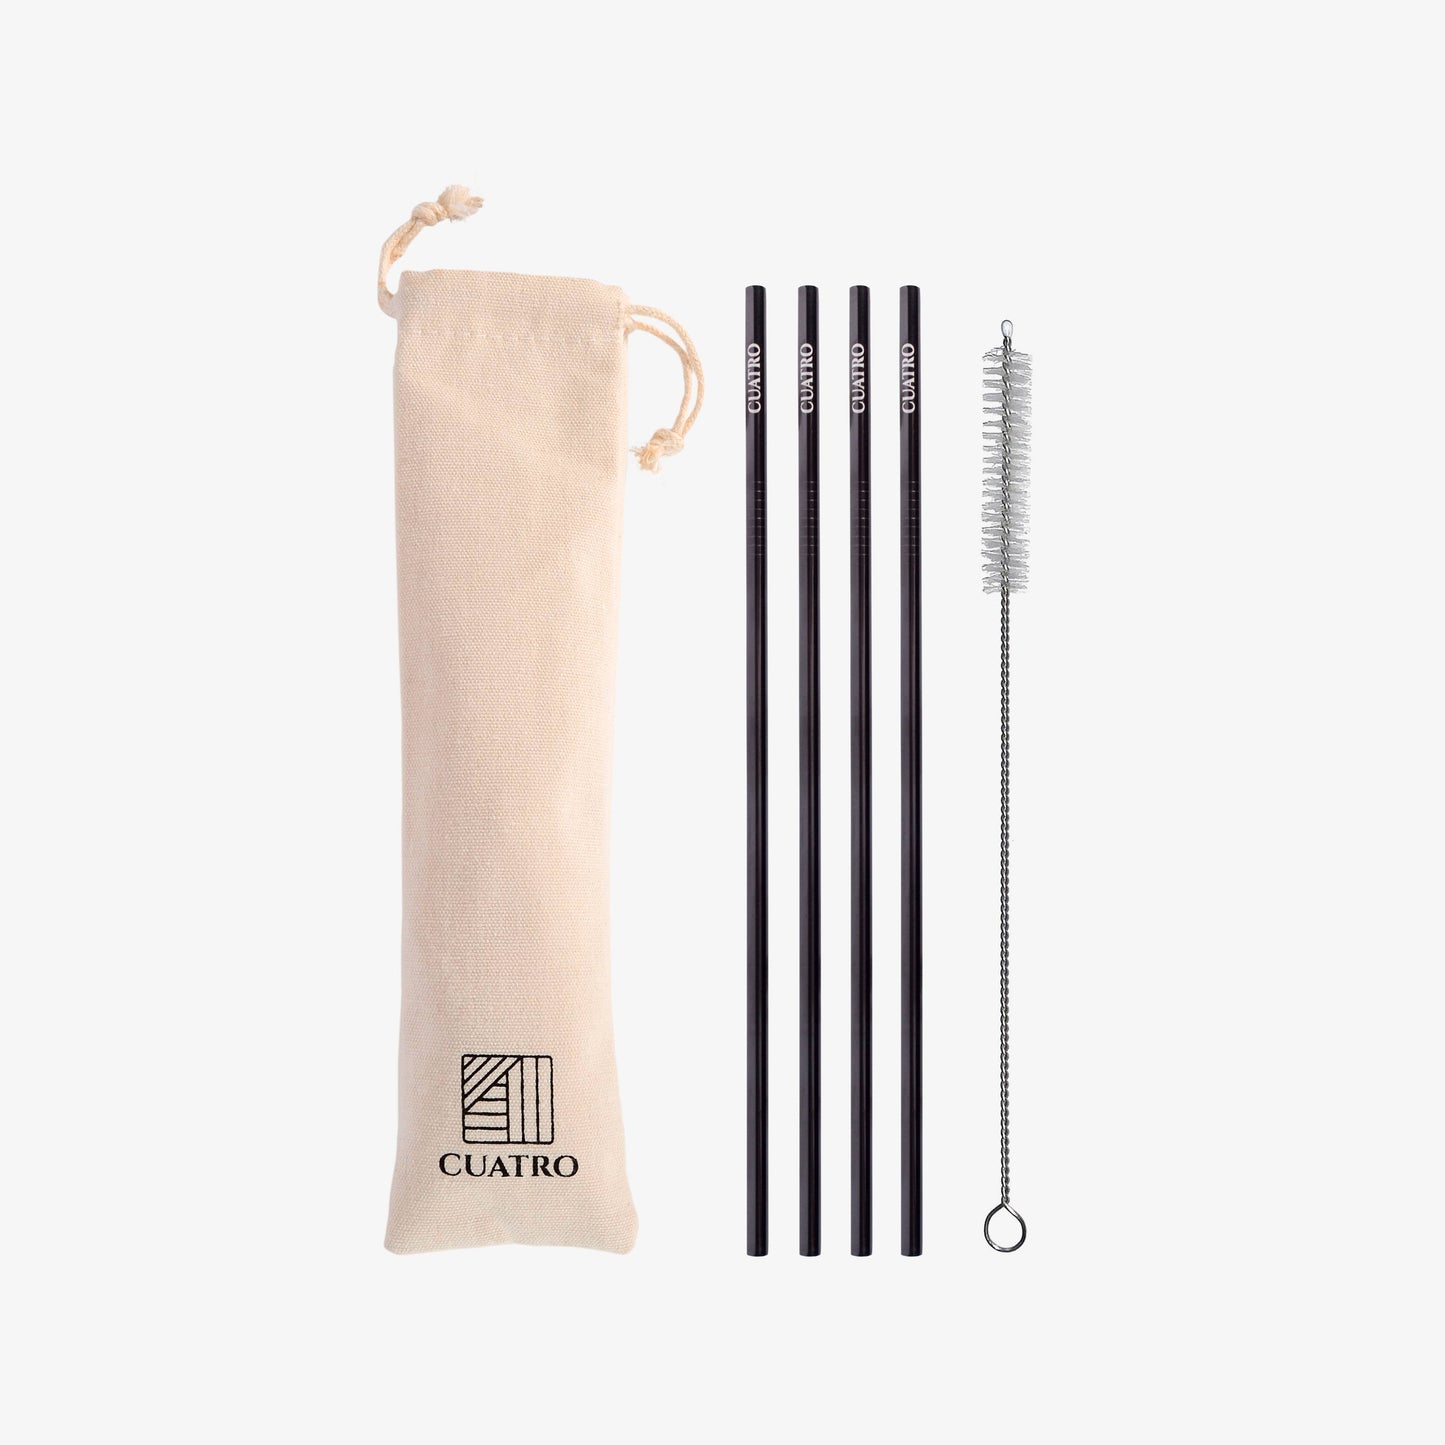 black stainless steel straws next to a bag and straw cleaner